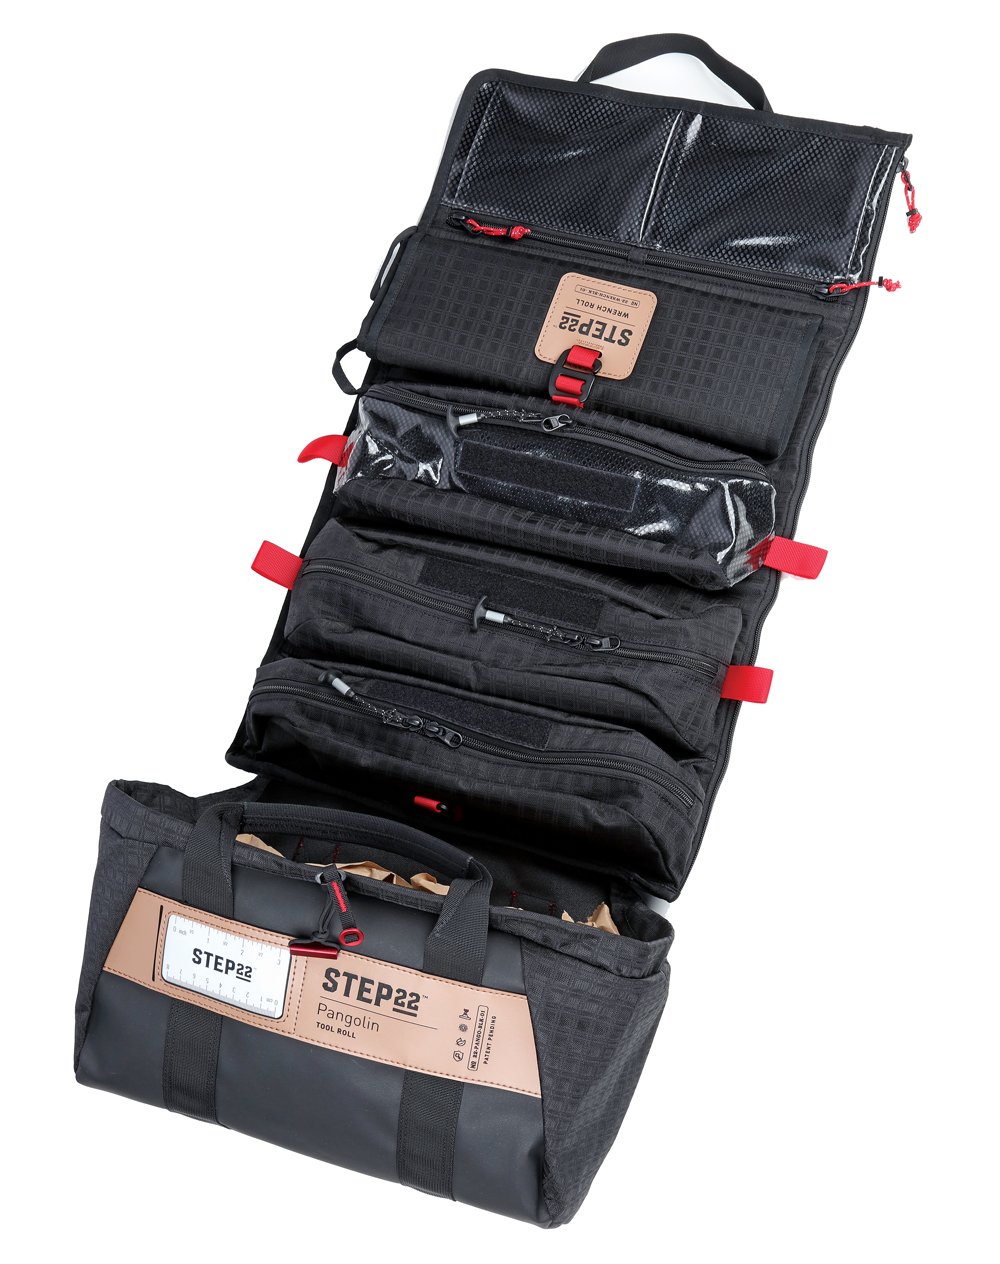 Vehicle Accessories: Step 22 Pangolin Tool Roll Bag